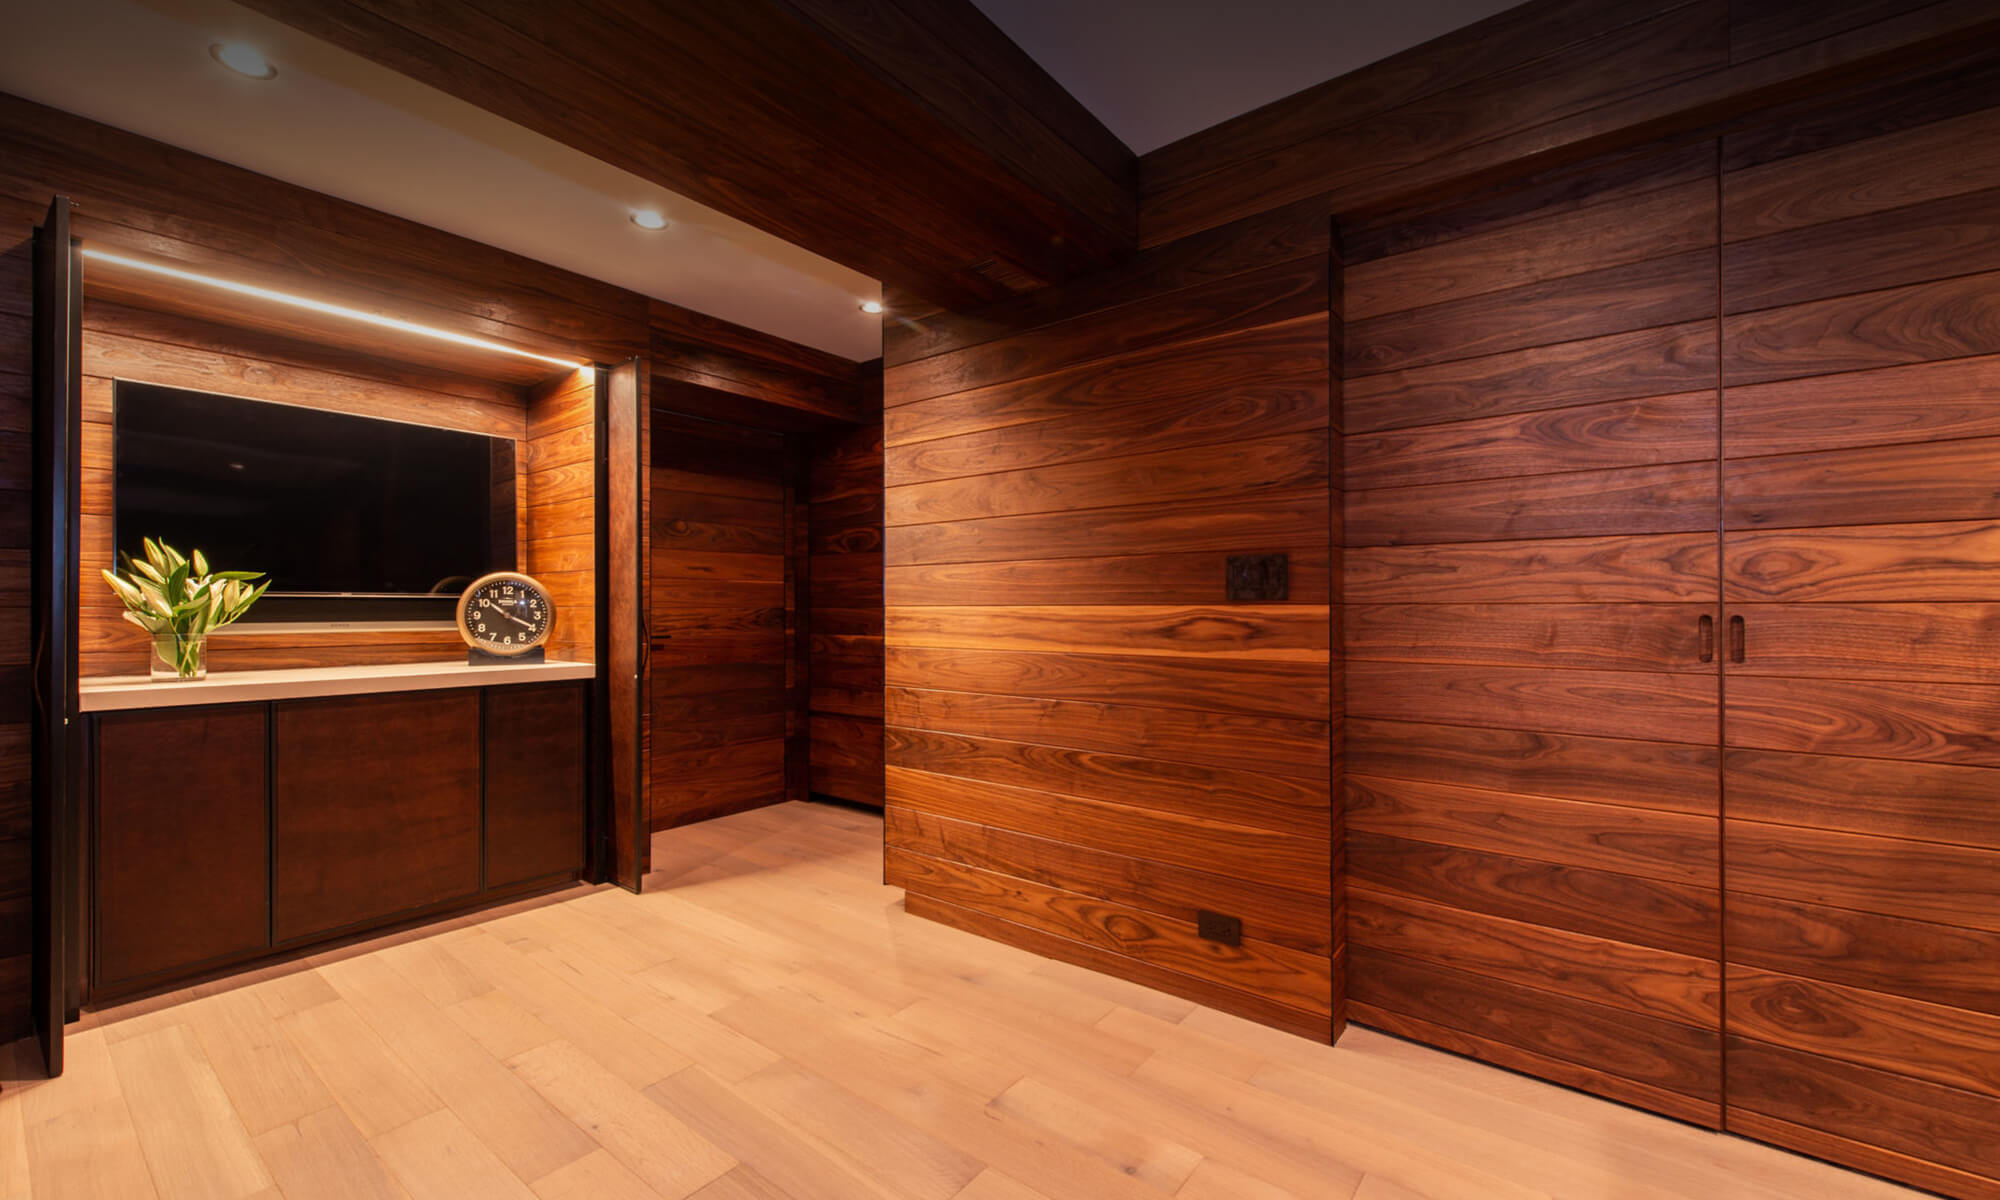 Artistic Construction all-wood wall exercise room with wood sliding doors